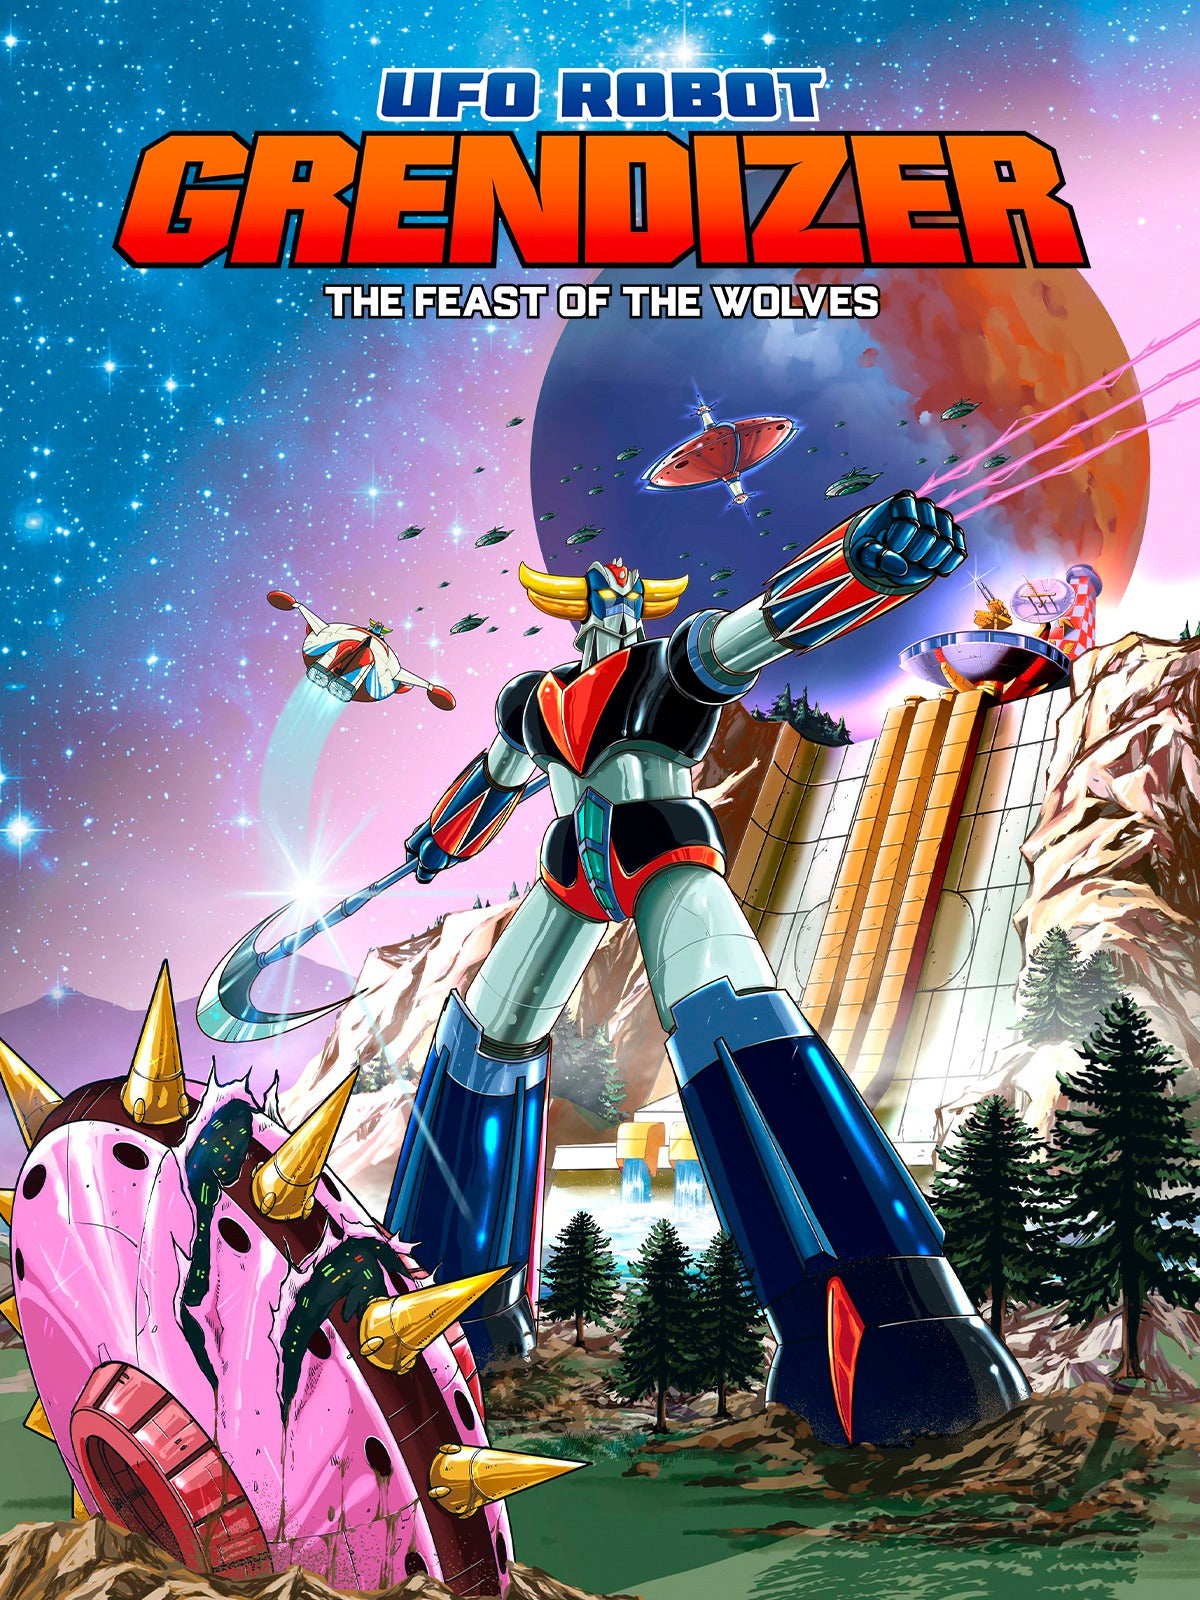 UFO ROBOT GRENDIZER – The Feast of the Wolves (Standard Edition) - Xbox